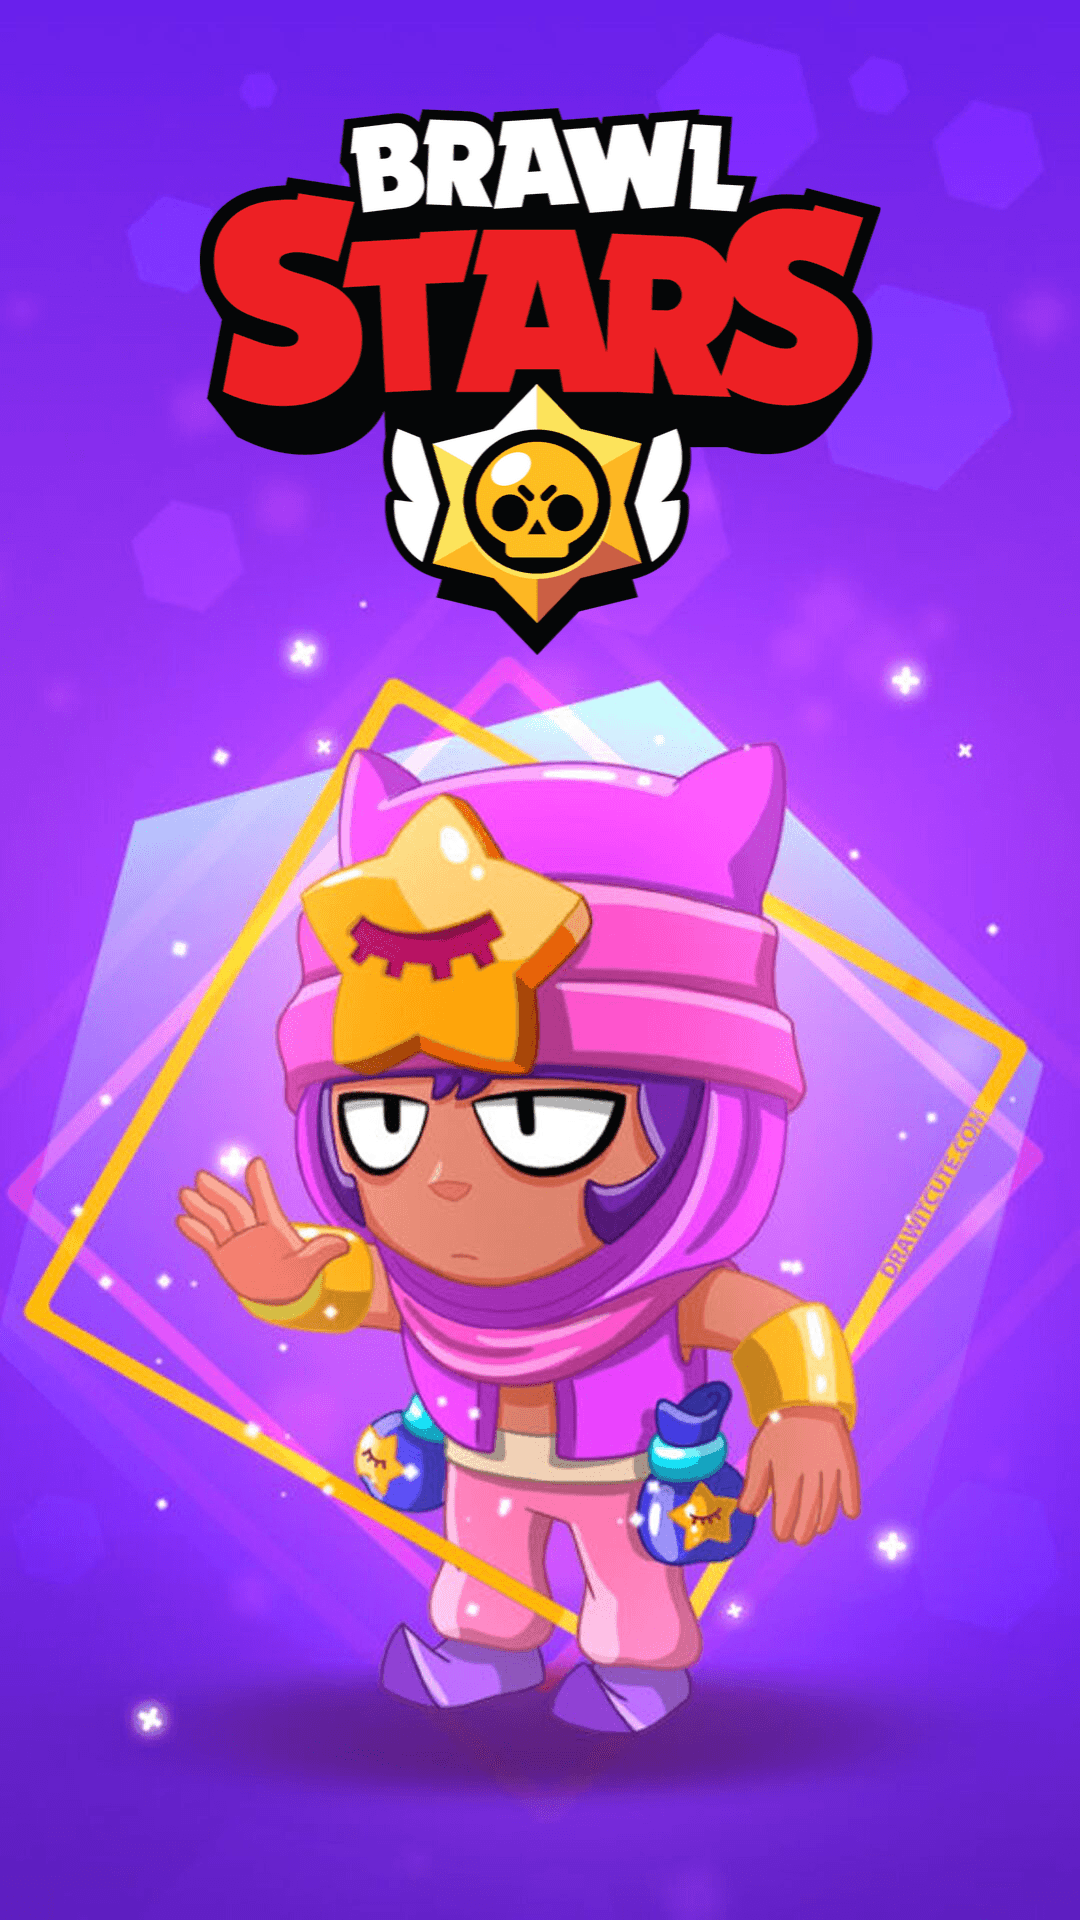 Sandy Brawl Stars Wallpaper 4k | Images and Photos finder